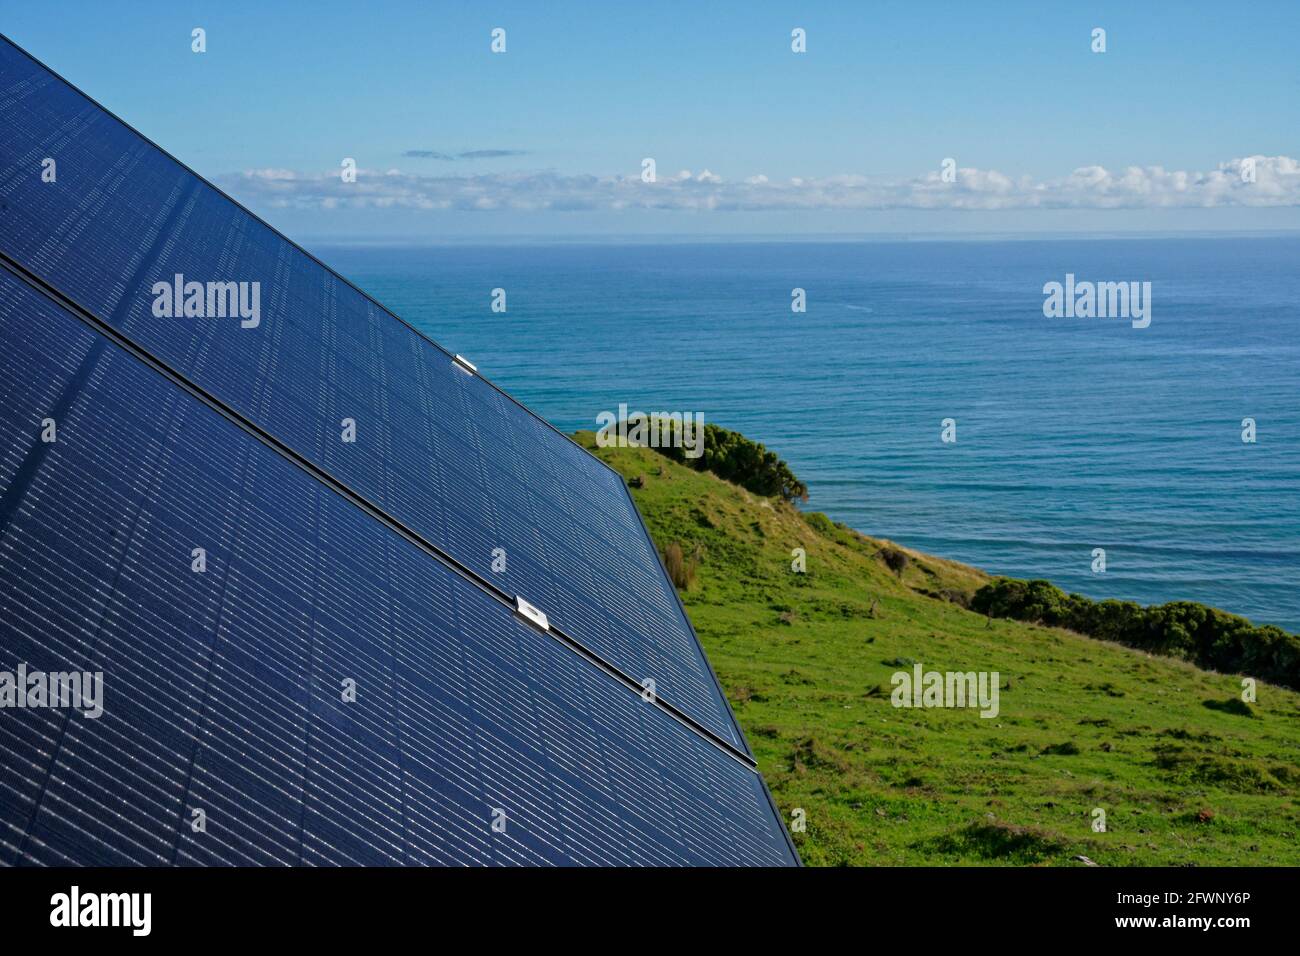 Solar panel providing solar electricity to an off grid property overlooking the ocean on the west coast of New Zealand. Stock Photo